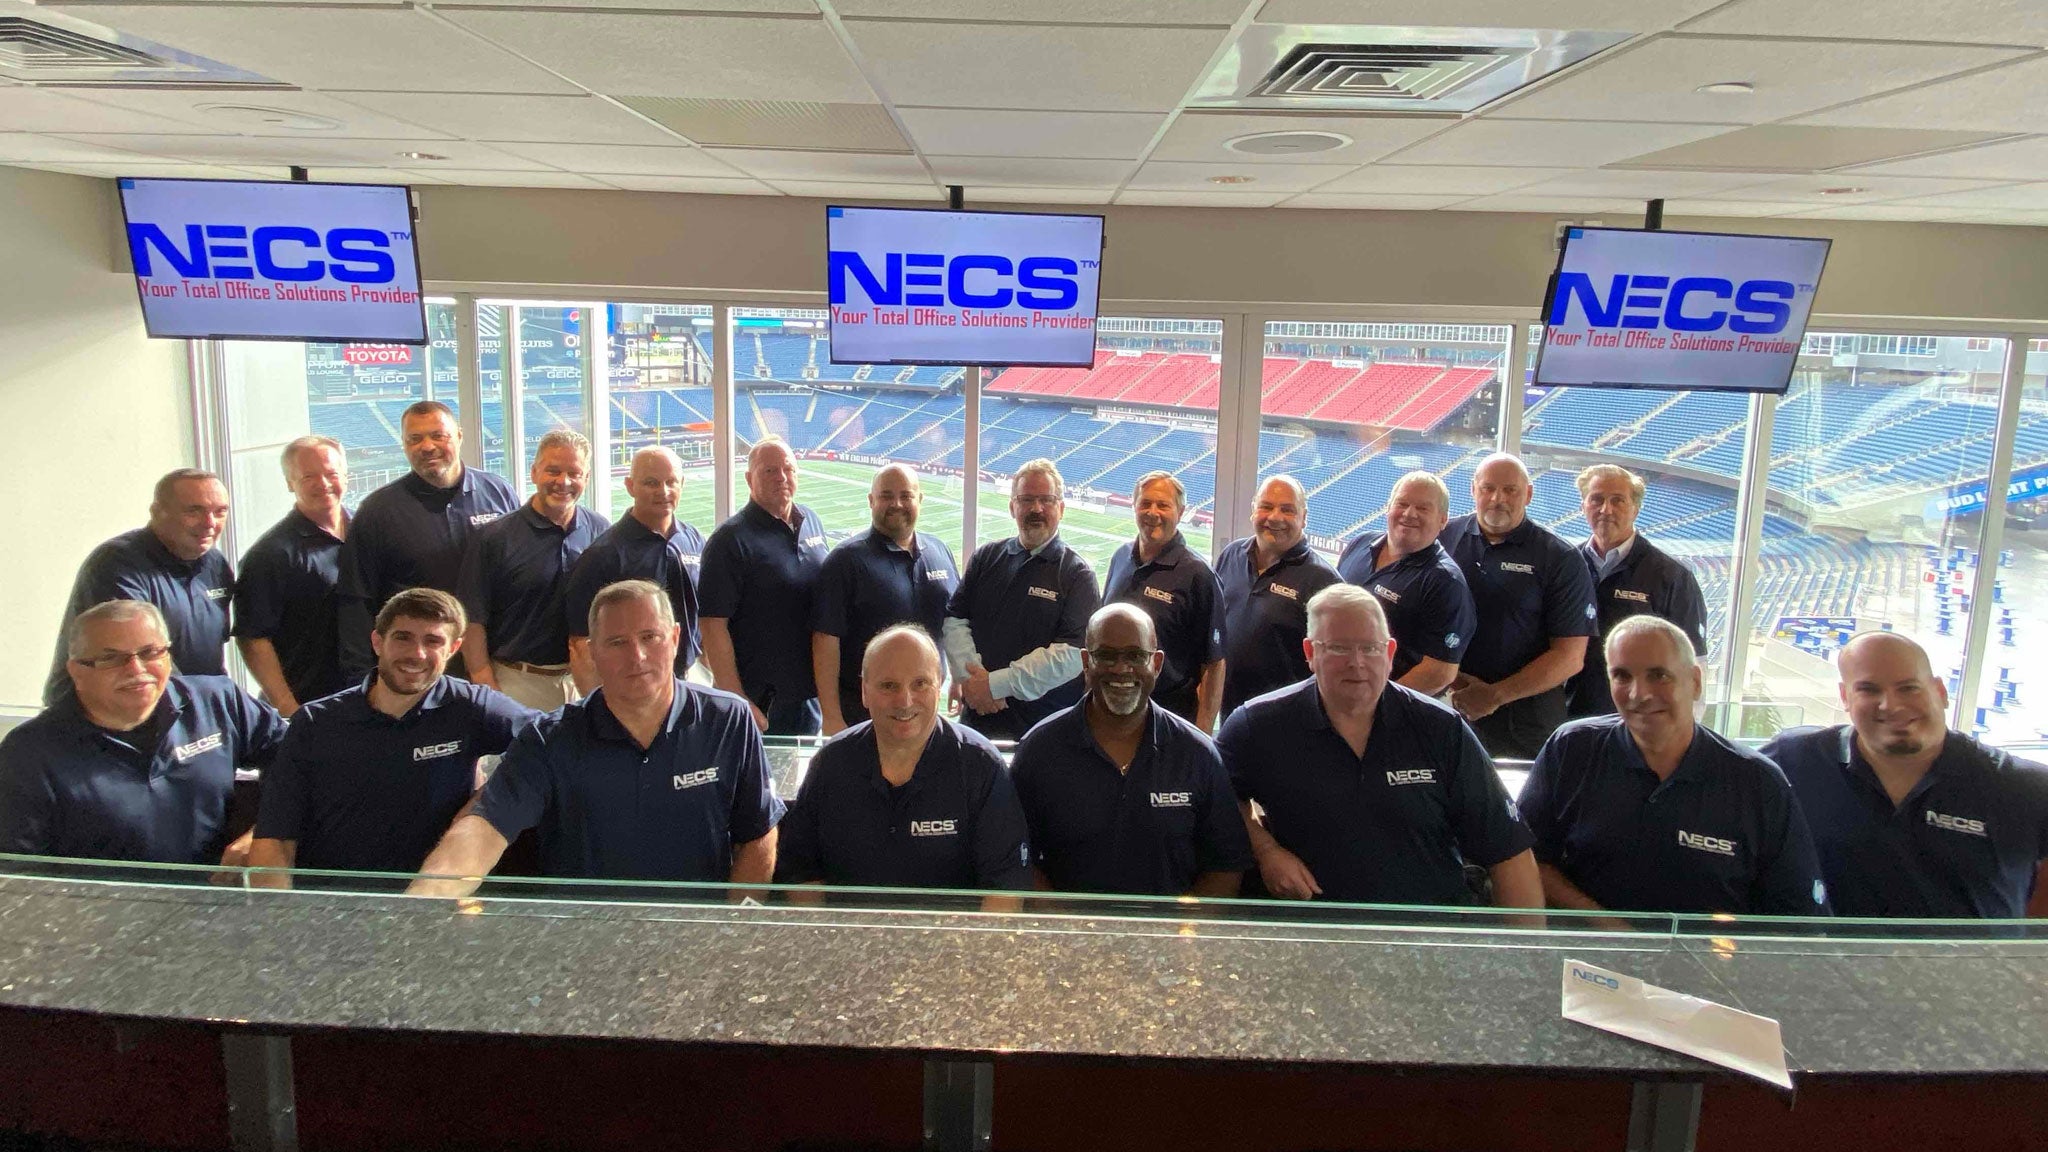 NECS Team at the Gillette Stadium for an Hp Conference